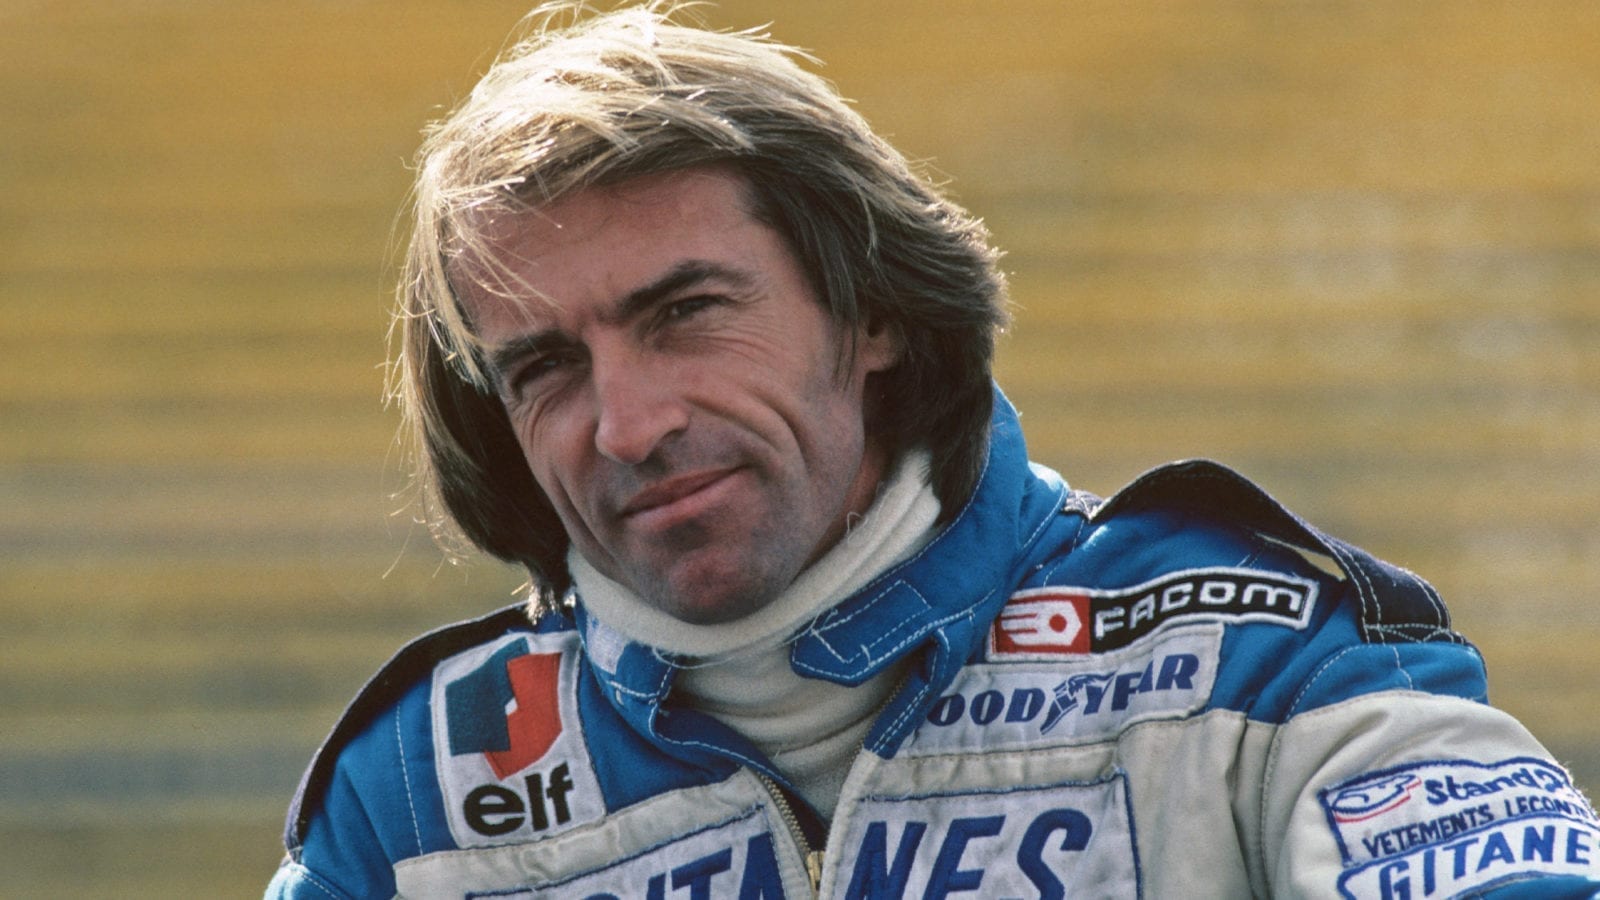 Jacques Laffite at the 1980 Canadian Grand Prix